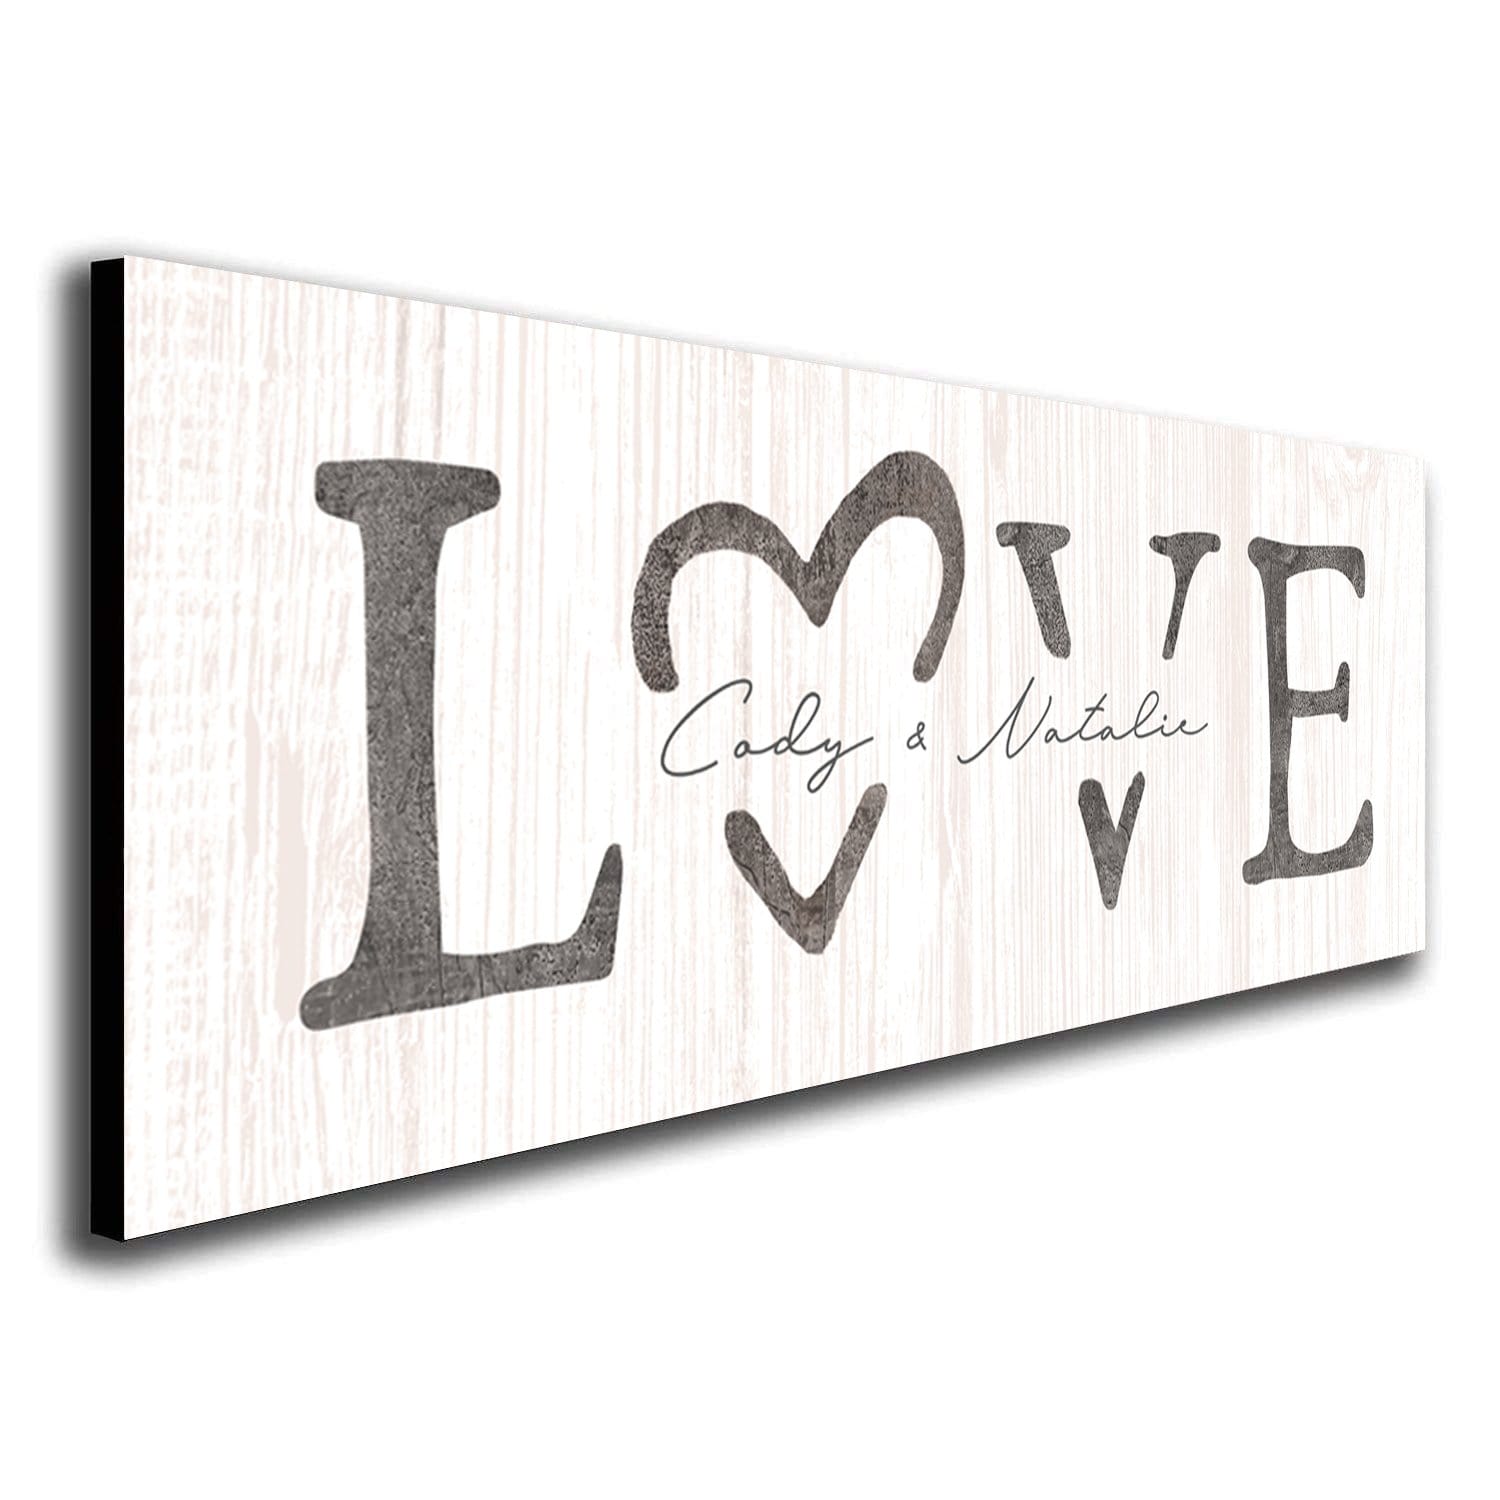 Personalized LOVE romantic art decor including yours and your partner's names